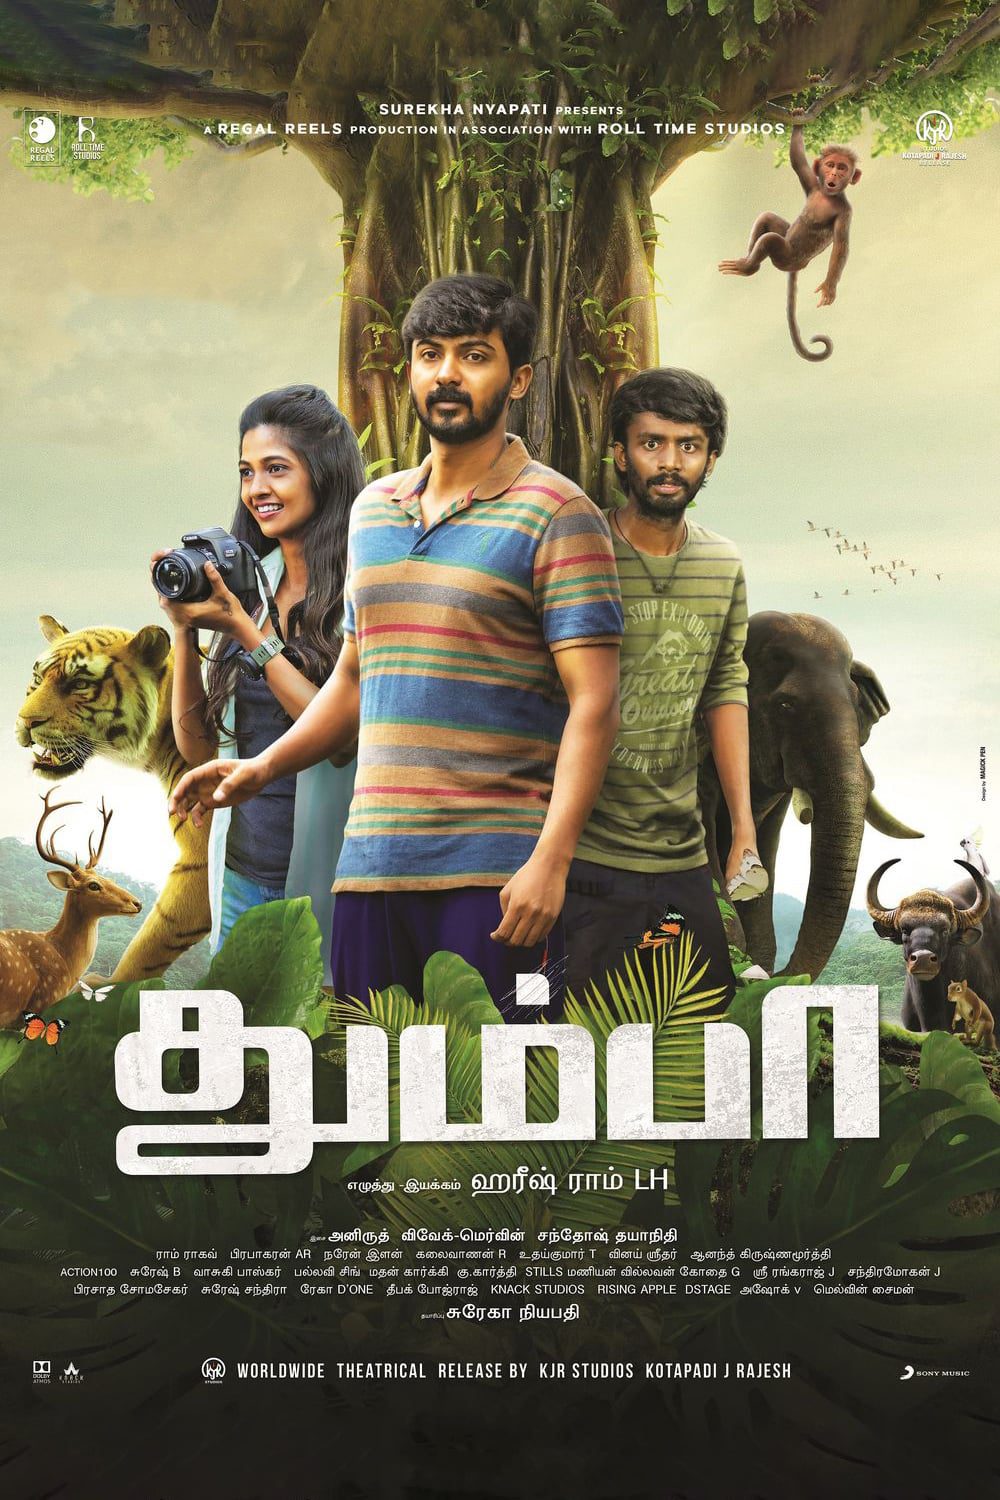 Poster for the movie "Thumbaa"